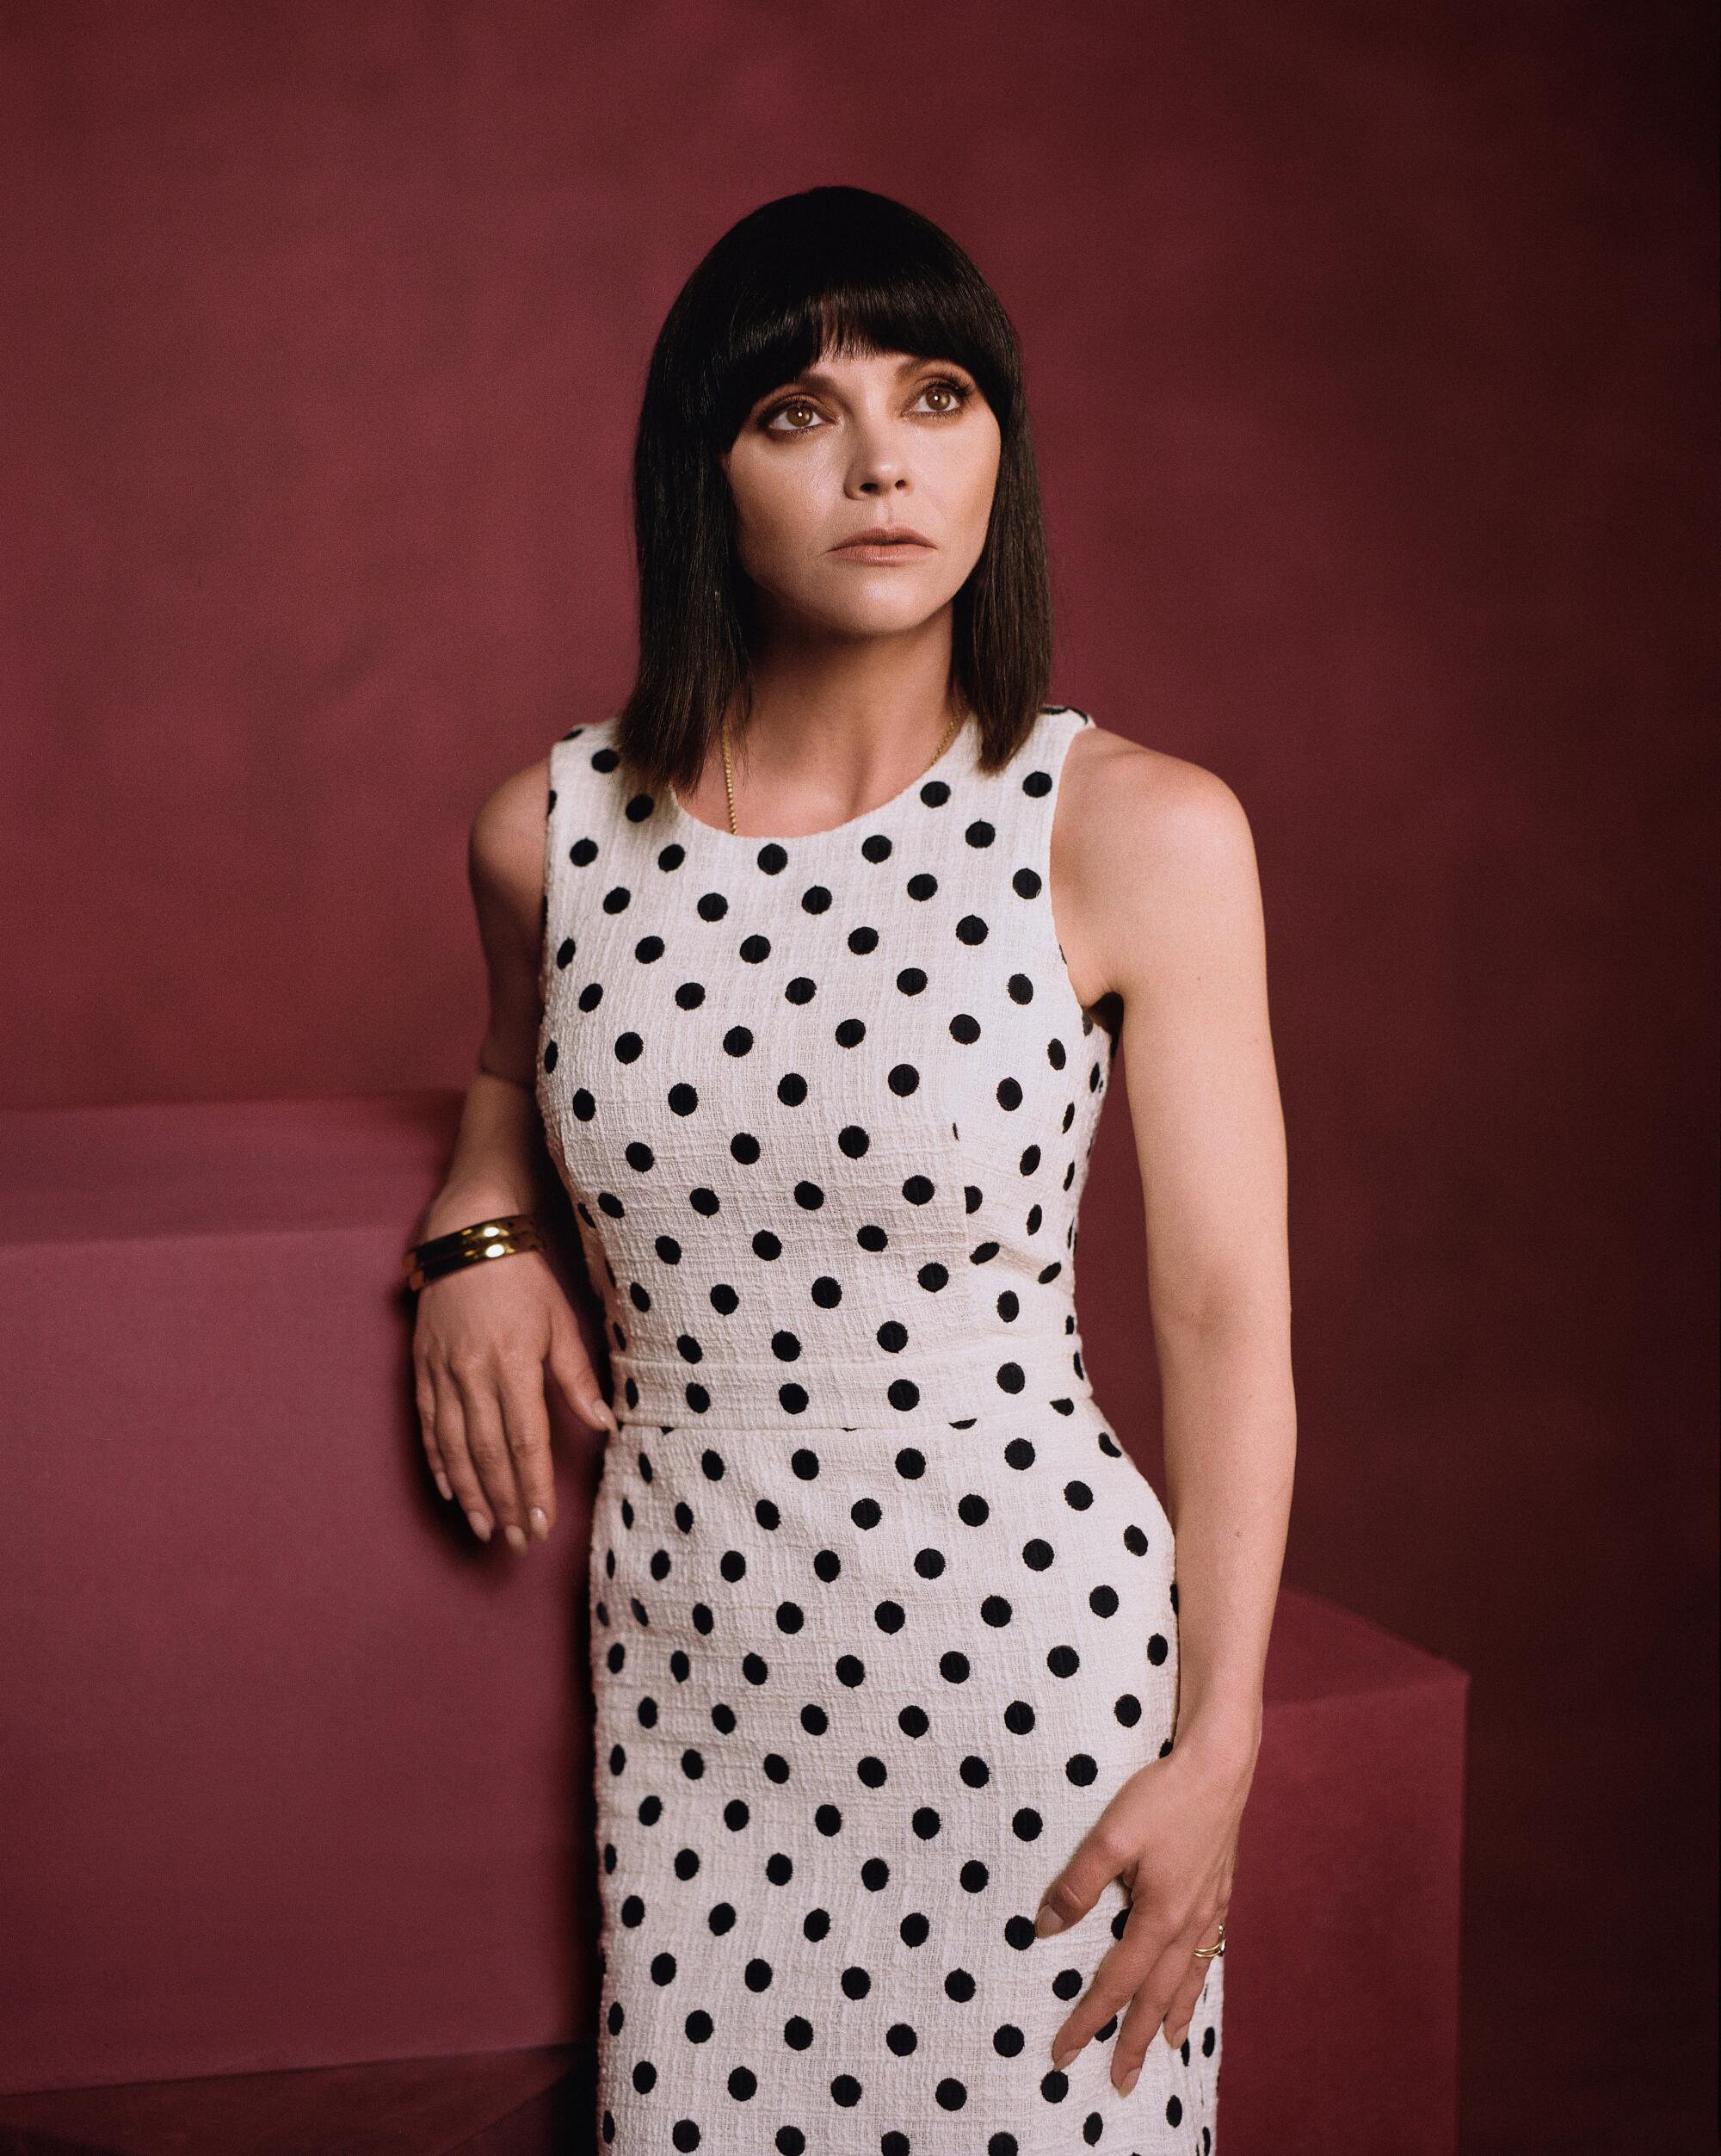 Actress Christina Ricci in a polka-dot dress poses for a portrait.